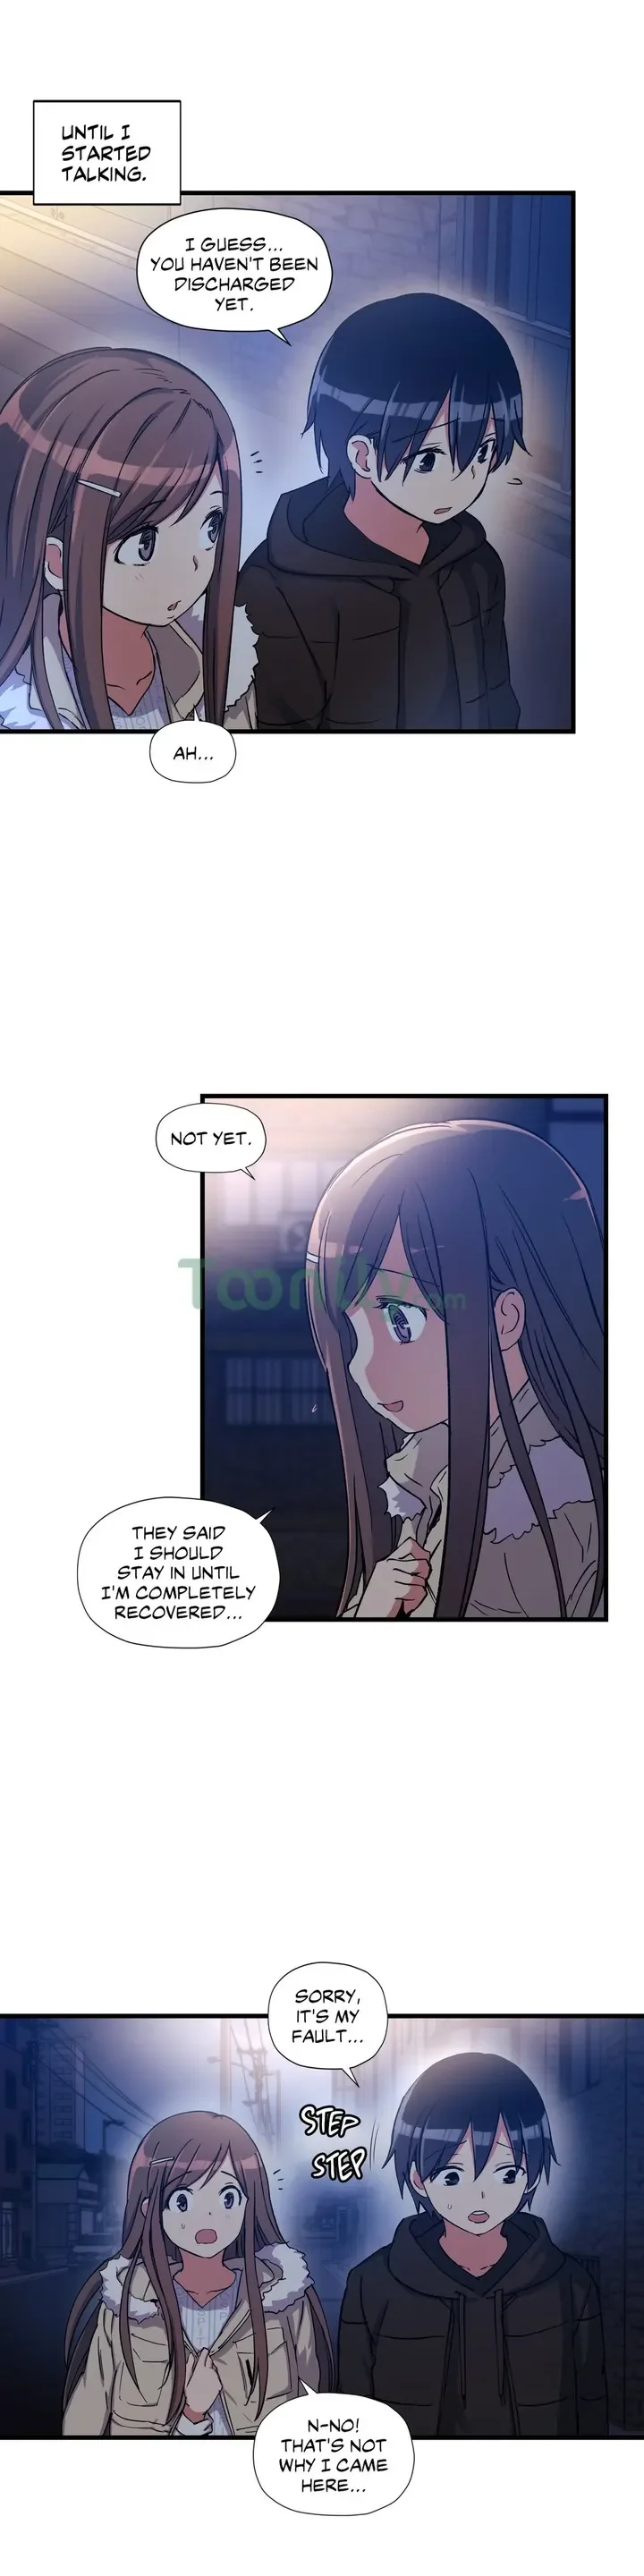 under-observation-my-first-loves-and-i-chap-38-1